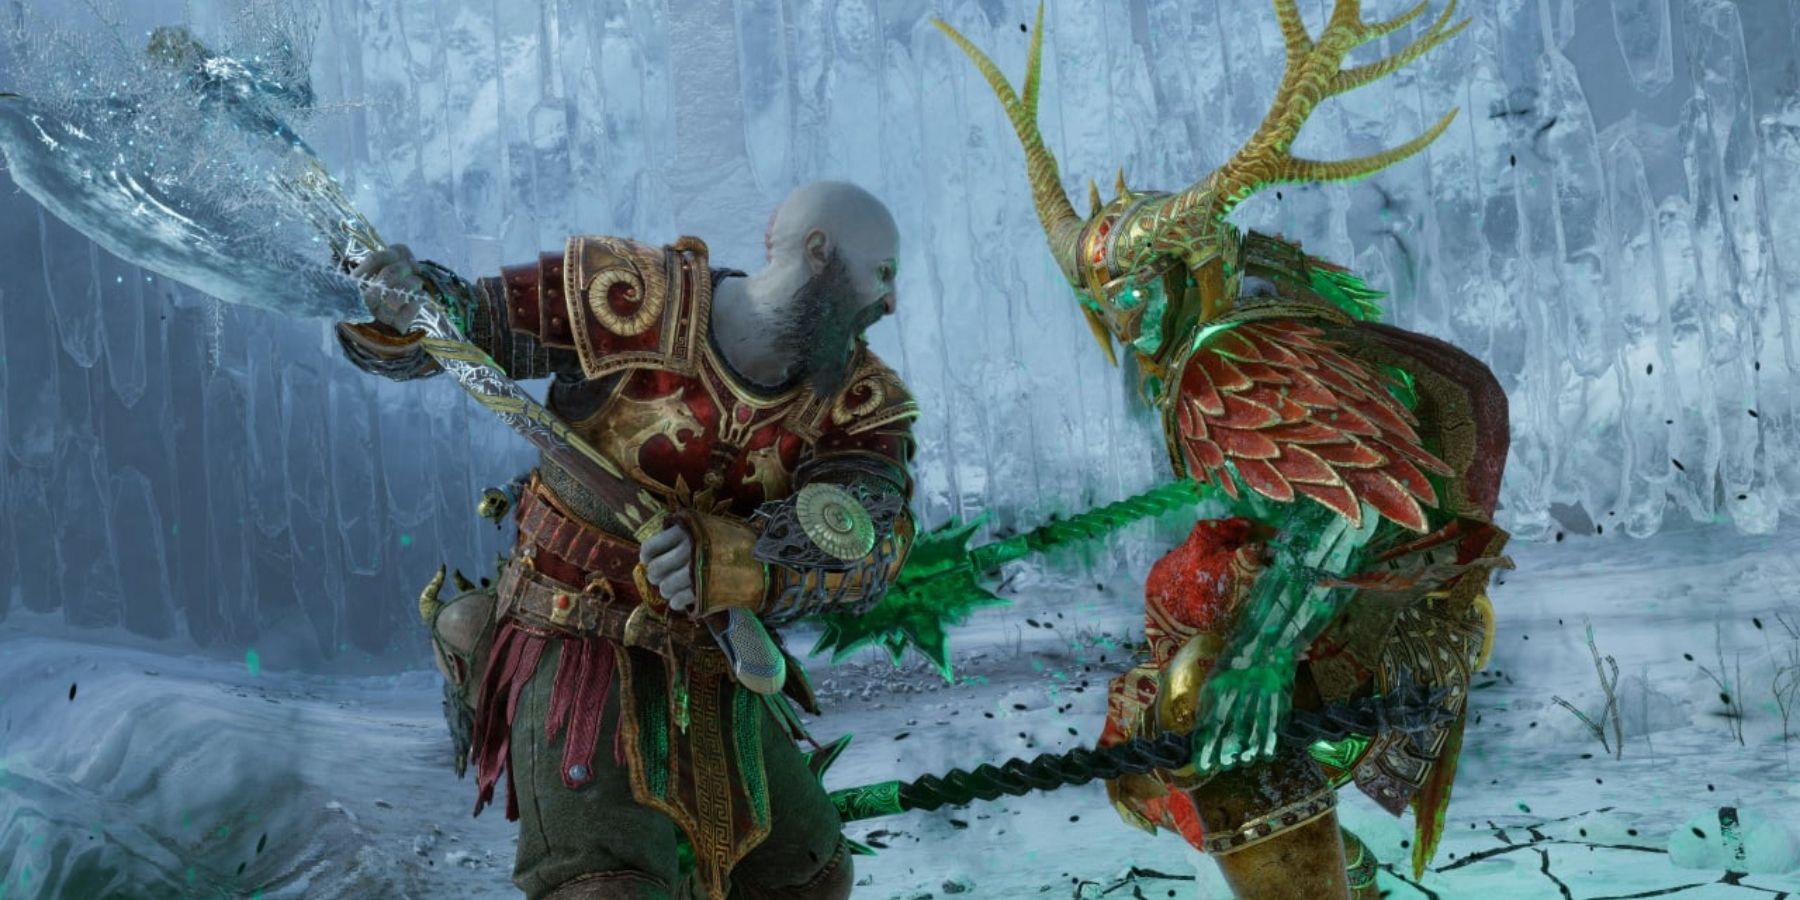 Kratos swings a large axe at an antlered enemy